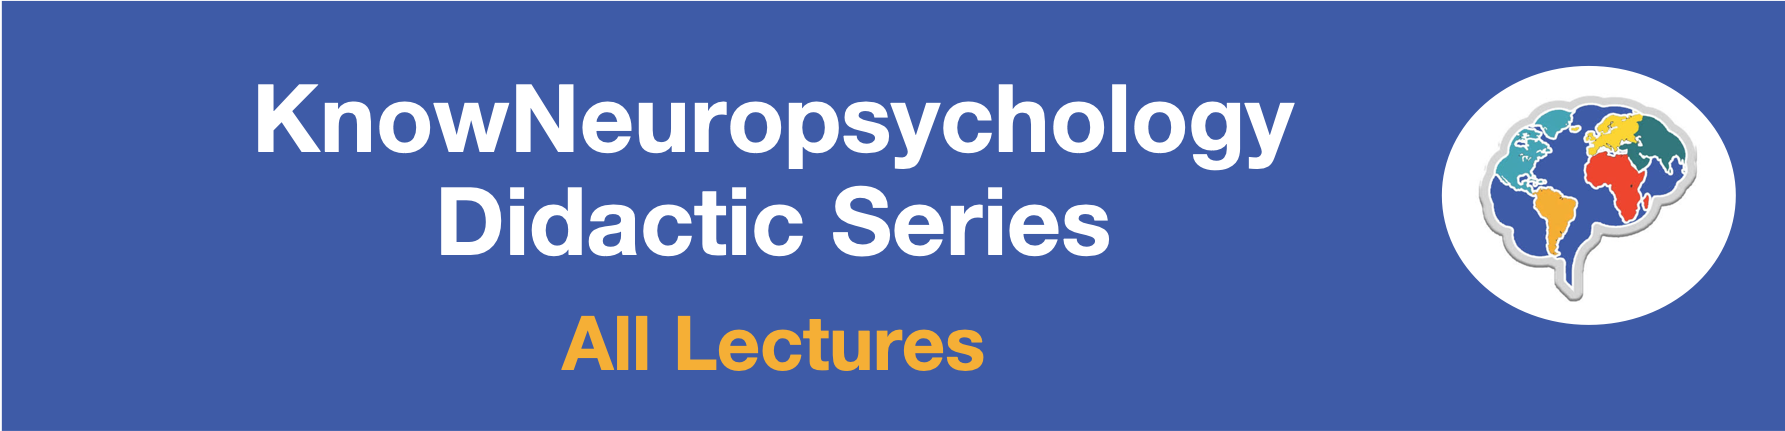 KnowNeuropsychology Didactic Series All Lectures